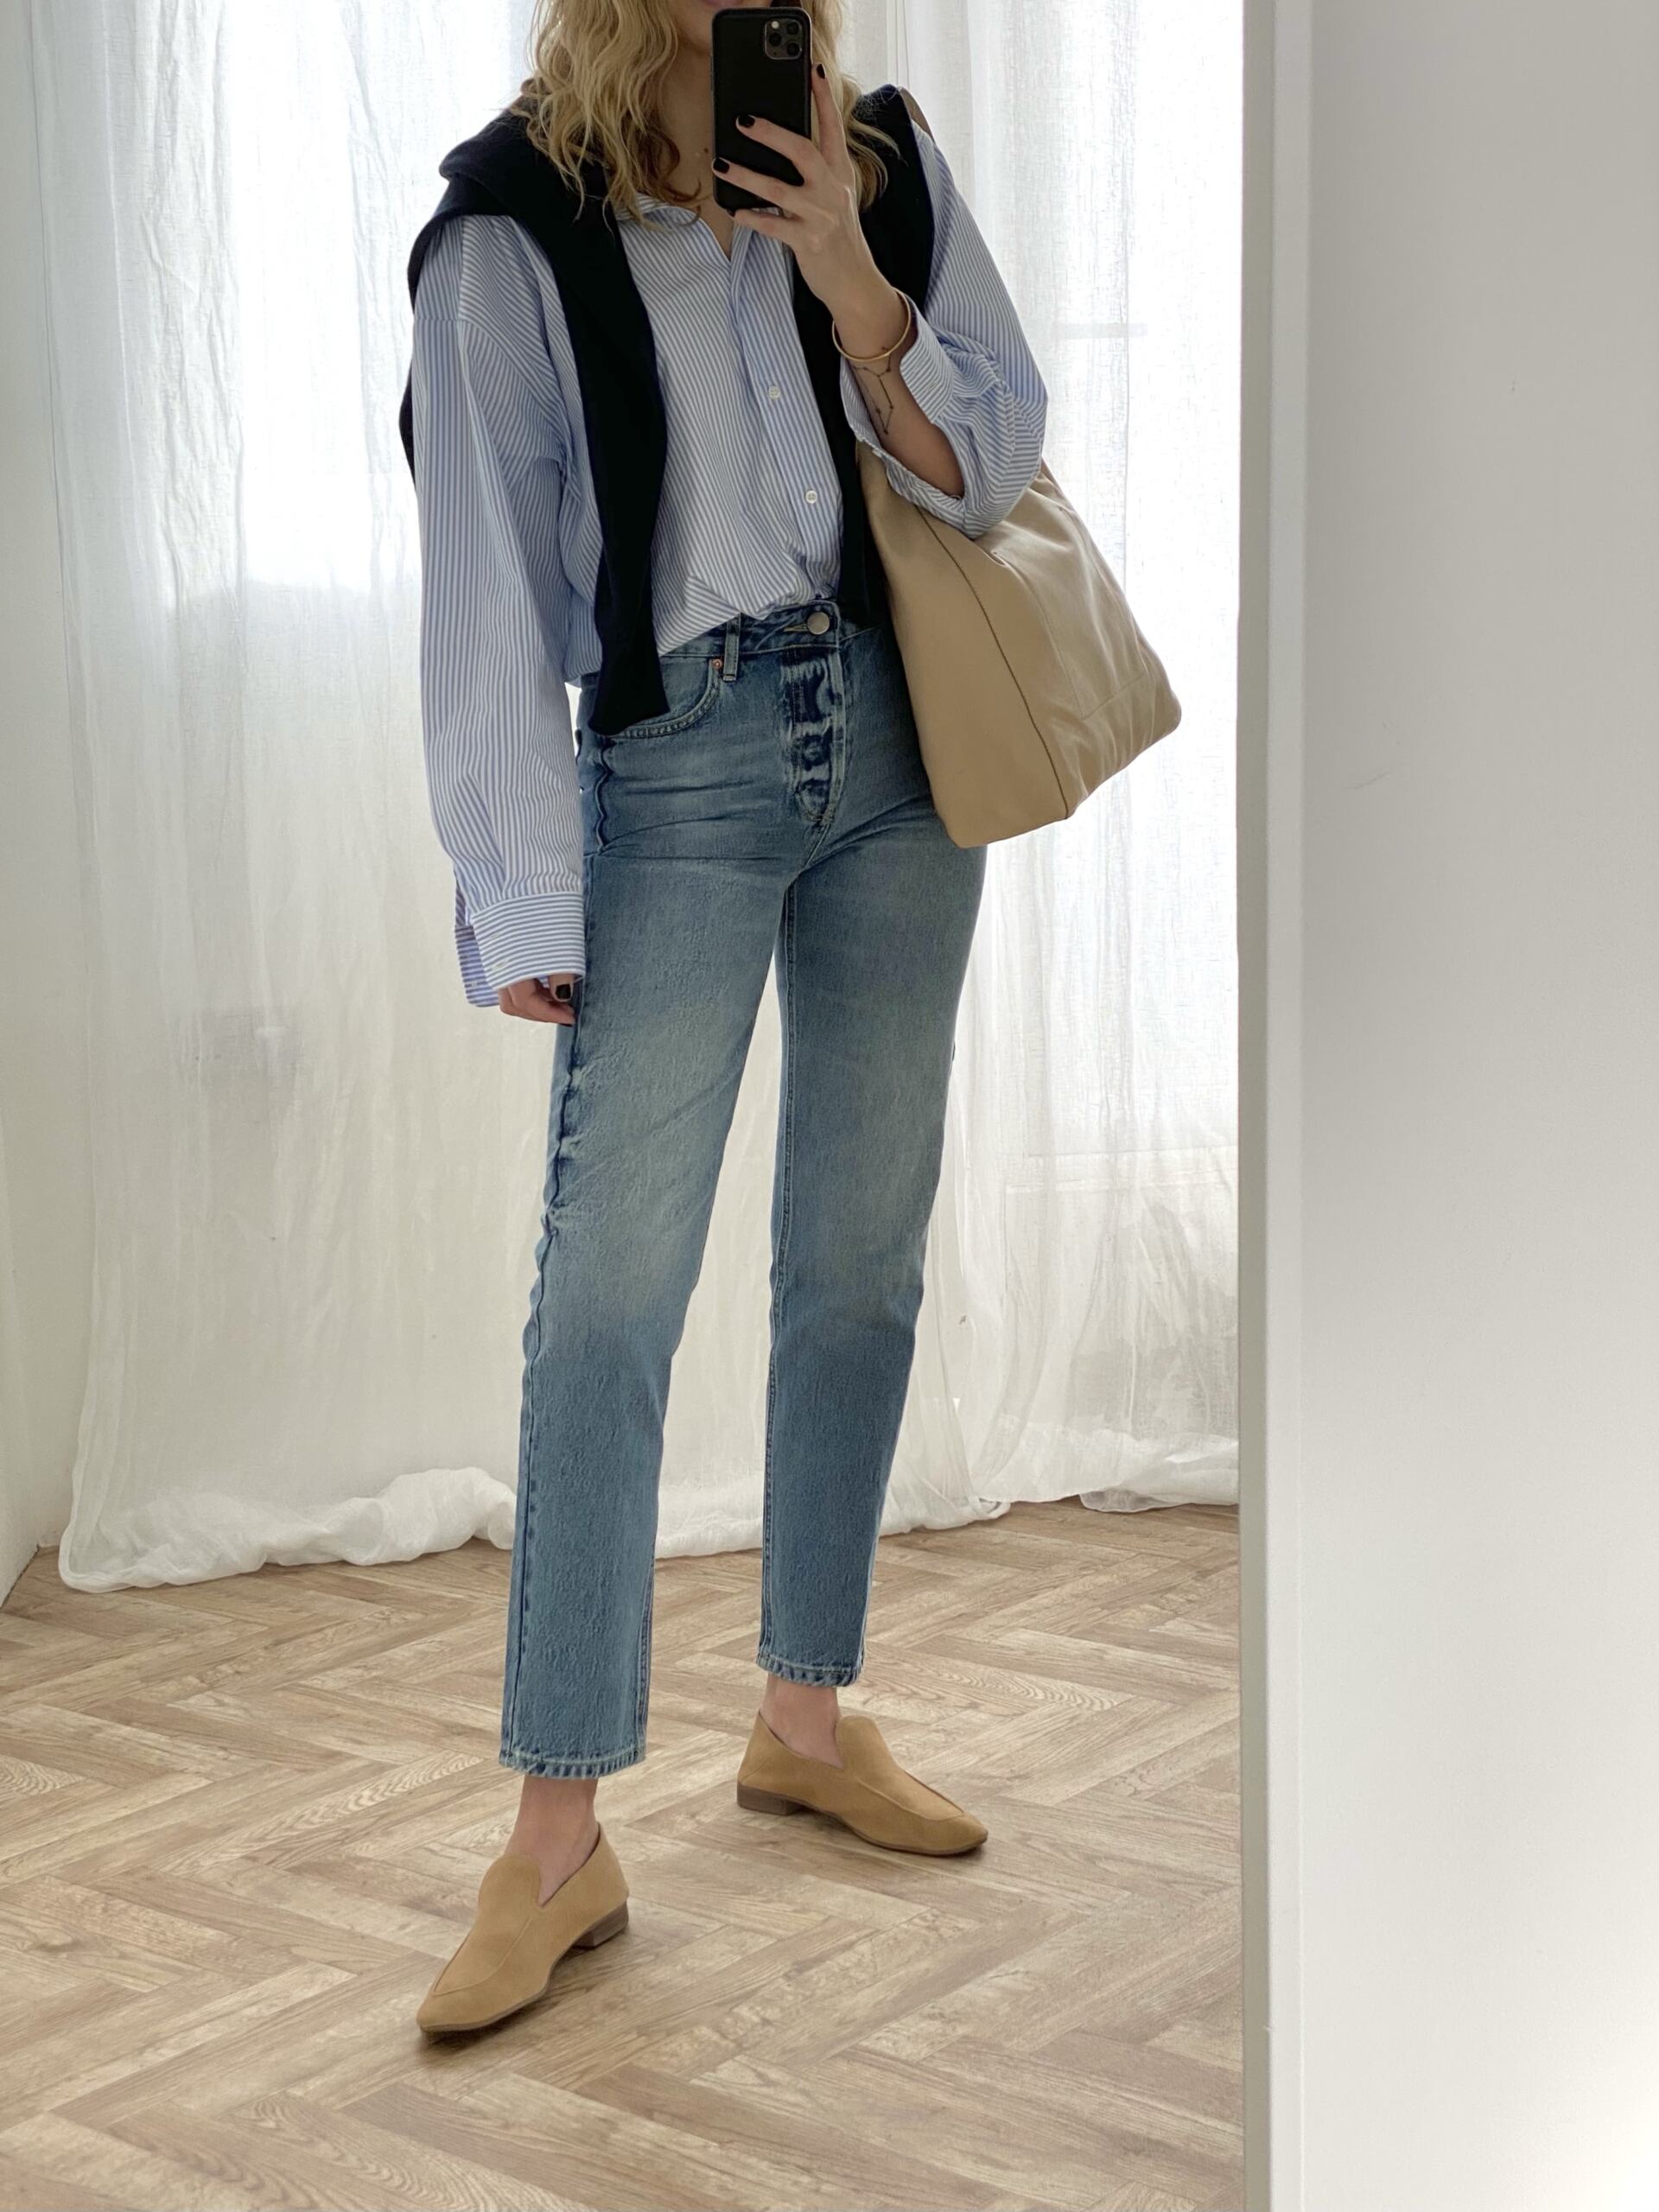 Blue stripe shirt, mid wash straight leg jeans, jumper worn over shoulders, camel suede loafers, cream leather bag, Spring outfit.